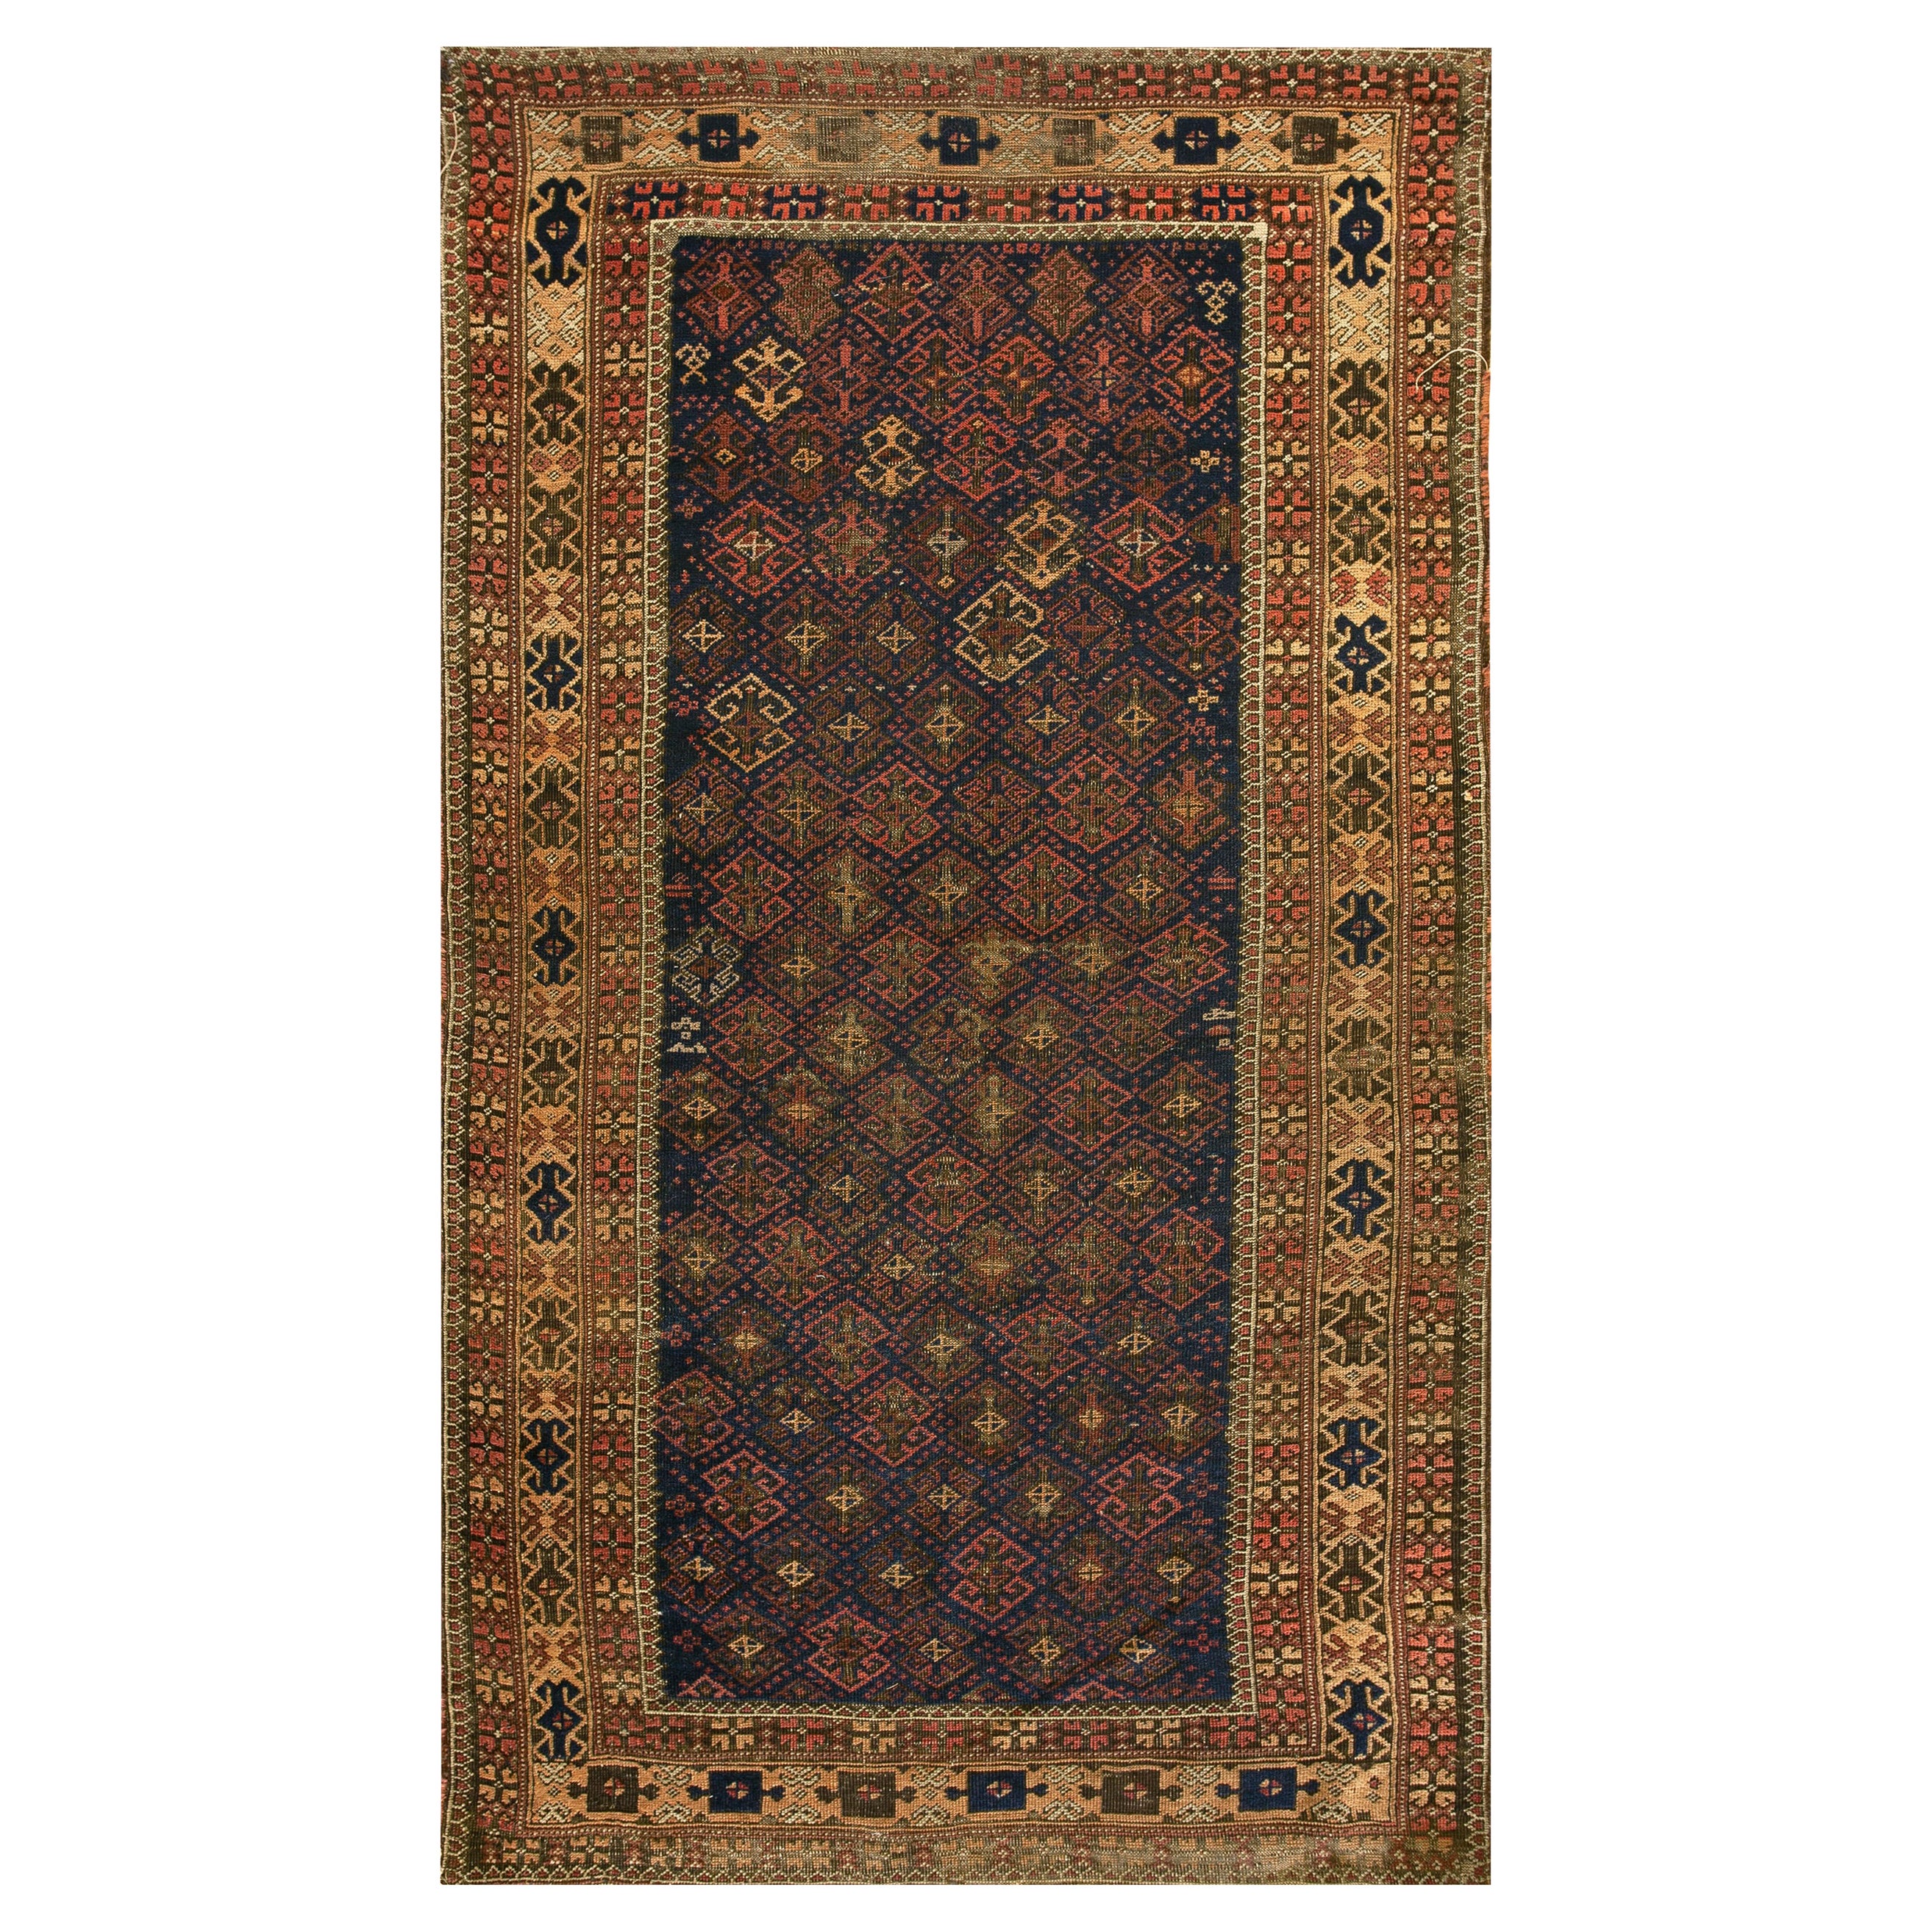 Early 20th Century N.E. Persian Baluch Carpet ( 2 10'' x 5'3'' - 86 x 160 cm )  For Sale